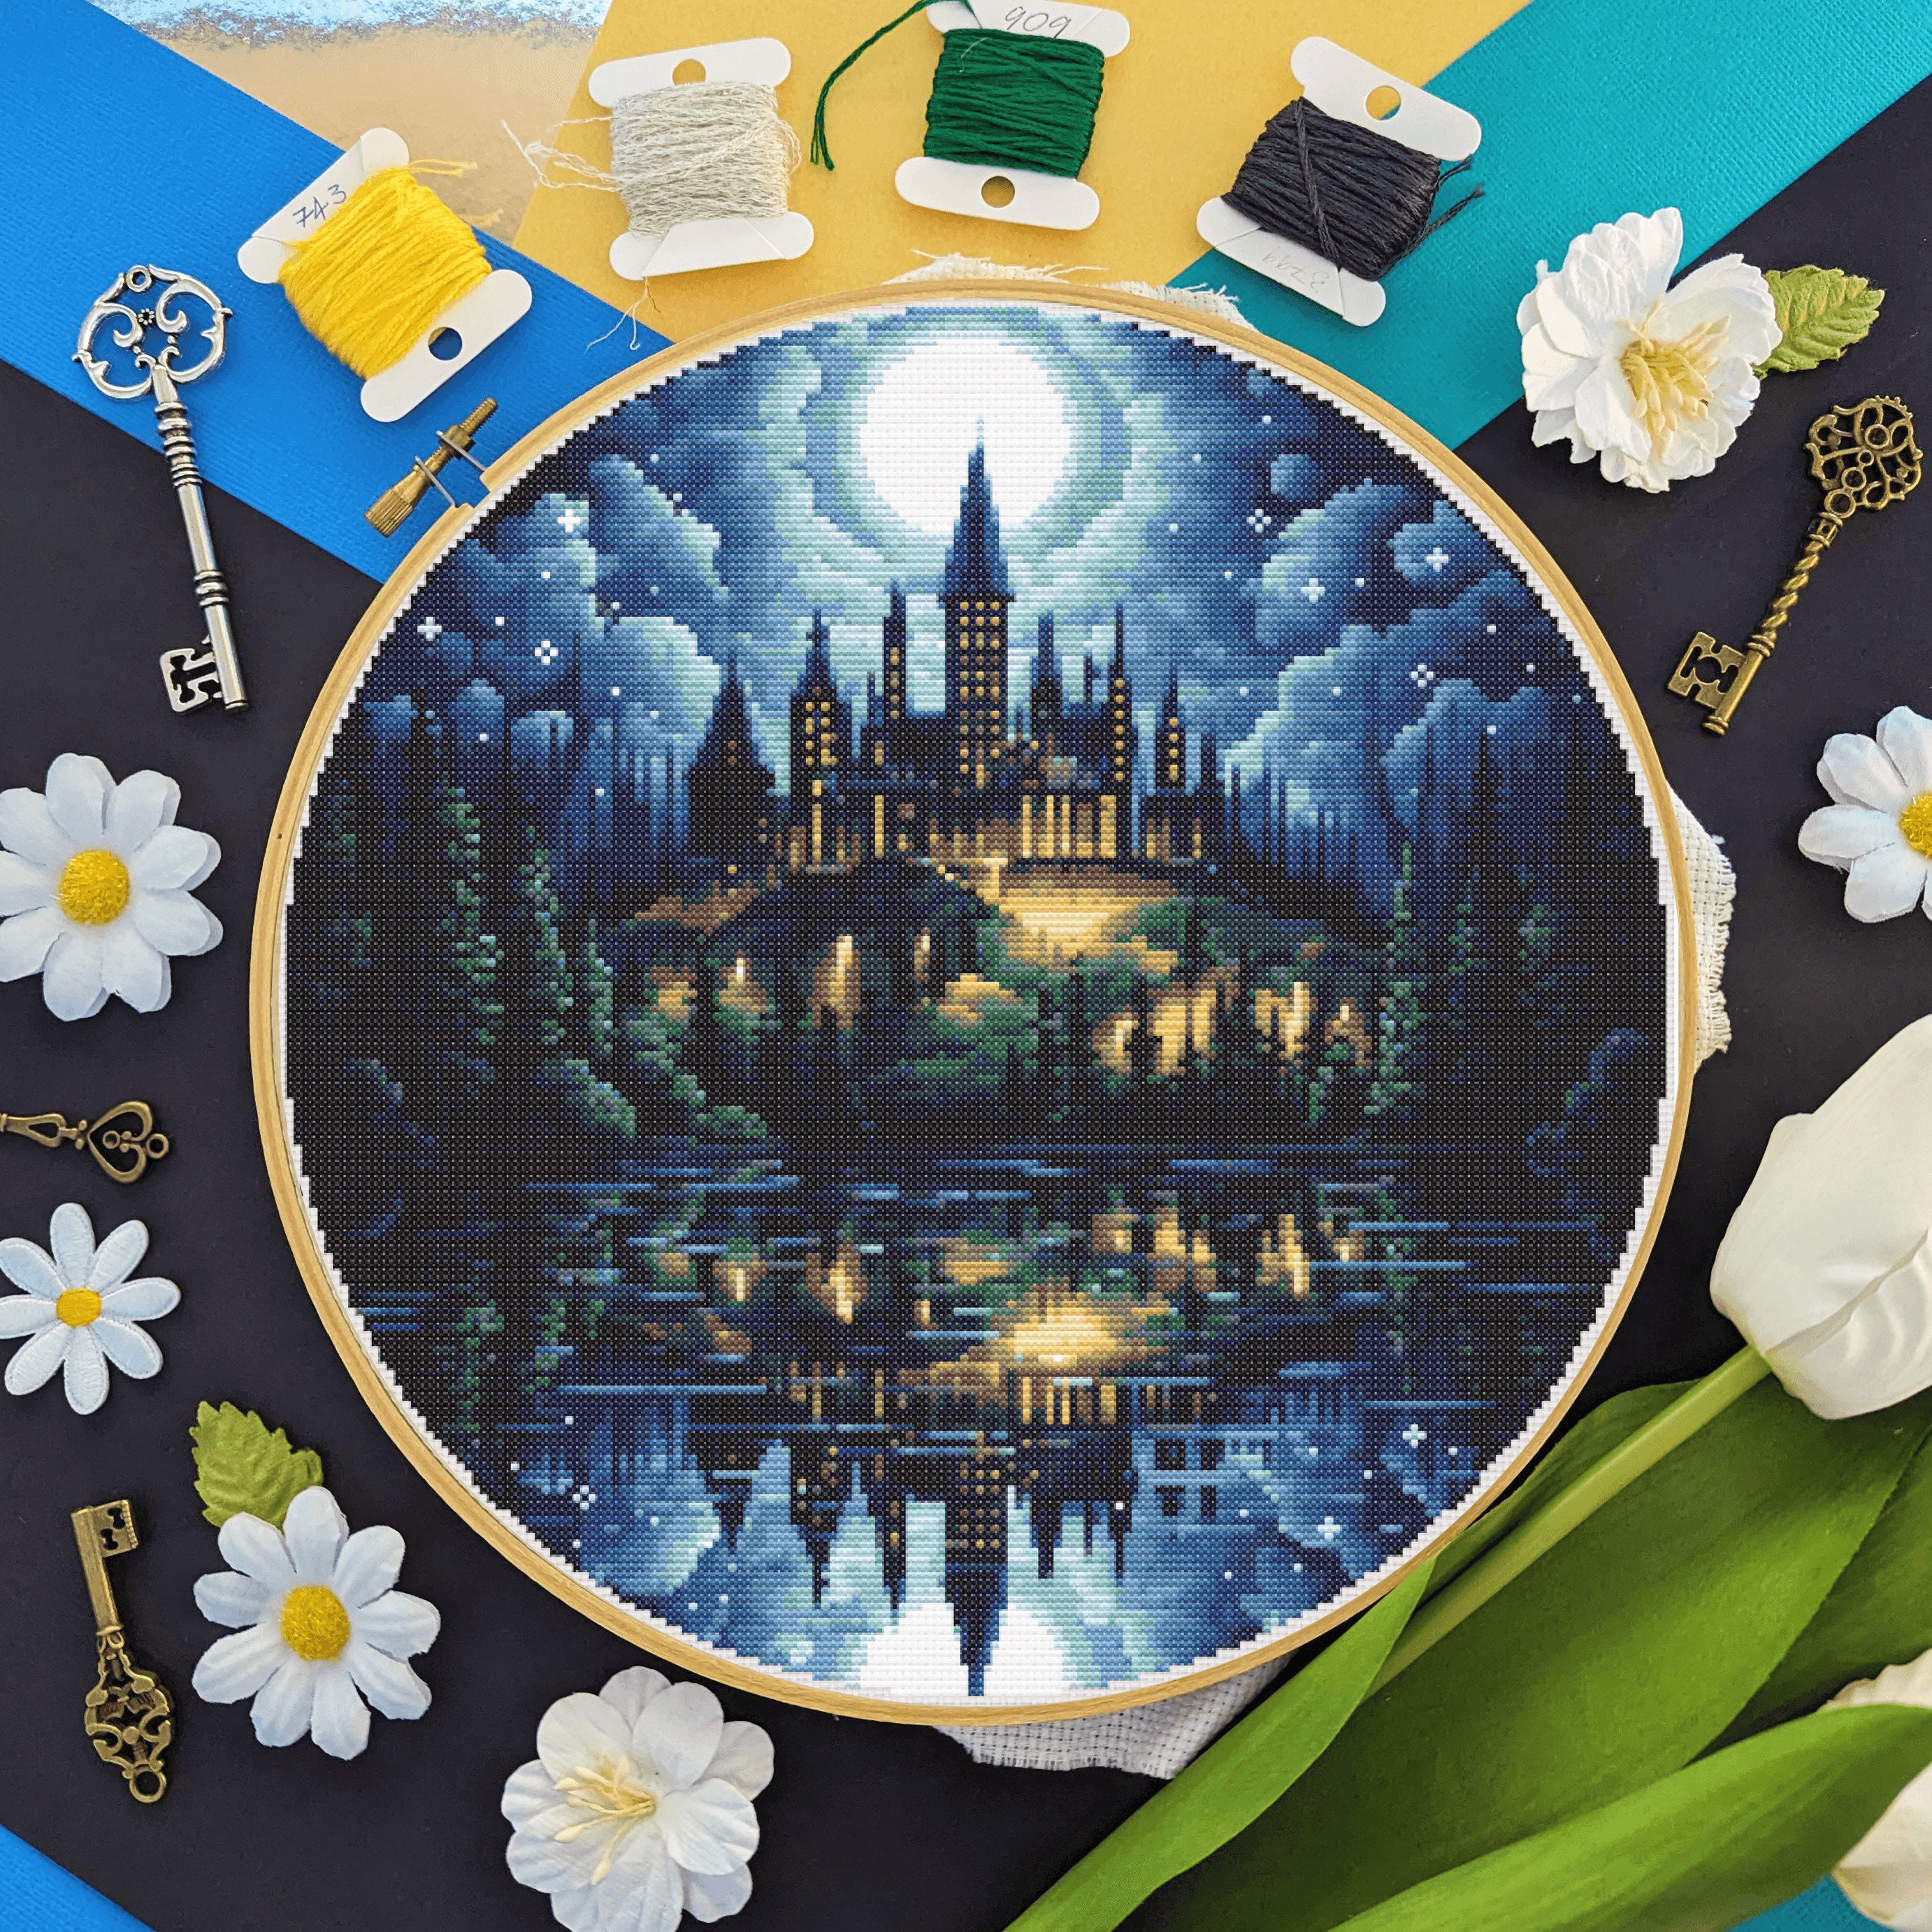 Harry Potter Mirror of Erised Nook Lamp - Made on a Glowforge - Glowforge  Owners Forum